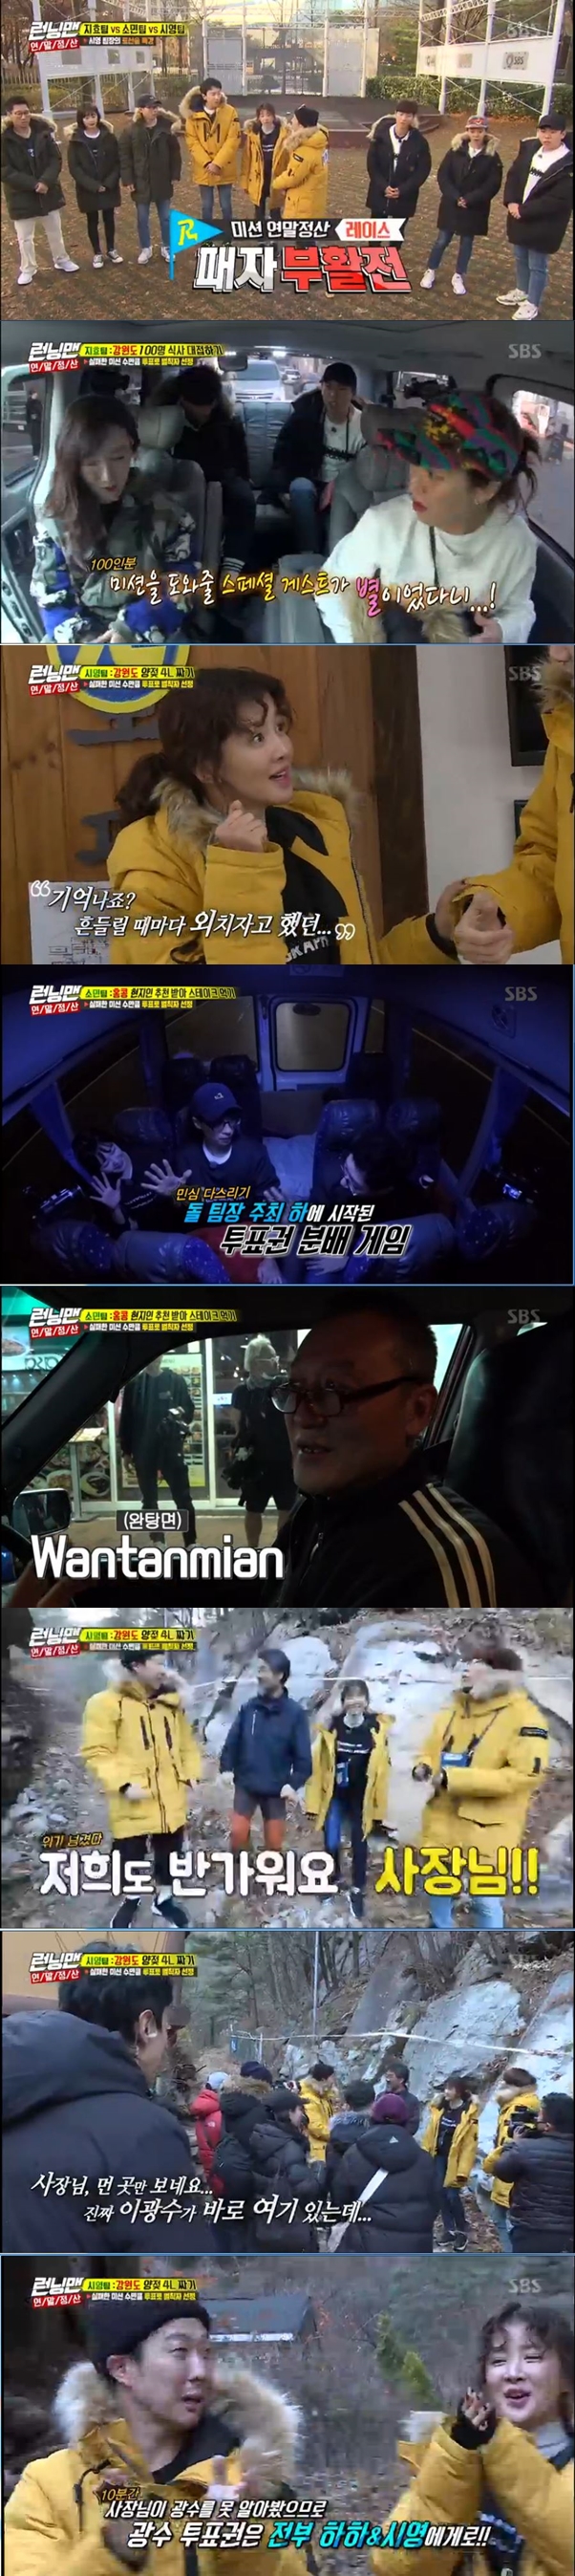 Lee Kwang-soo has had a day of humiliation.Lee Si-young was a guest on SBS entertainment program Running Man which was broadcasted on the afternoon of the 9th, and together with the members year-end settlement Race.Running Man official penalties have regrouped the team.The crew instructed Jeon So-min and Song Ji-hyo to make a team leader and get to the destination first.Jeon So-min took Yoo Jae-seok and Song Ji-hyo took Kim Jong-guk as their first team member.Jeon So-min then picked up nearby Ji Suk-jin and Lee Kwang-soo in the car.After the team was formed, Ji Suk-jin laughed and laughed, saying, A familiar landscape was created again.The members who were heading to their destination received text messages from the crew, and the texts with the destination were written in secret to anyone other than the team leader.Team members were told to find a new team leader, and Lee Kwang-soo and Haha, who rushed down to their destination, teamed up with new team leader Lee Si-young.The newly formed team was the first to arrive at the destination, and received the great benefits needed at Race.The members were appalled to hear the full-fledged year-end settlement Race rules, which each team had chosen to perform by selecting one of the overseas missions it had implemented this year.The location was set for Hong Kong, Gangwon Prince and South Korea due to filming permit issues; each team was determined the location for the vehicle to the Bokbulbok Show.The Bokbulbok Show results showed that the lucky team to Gangwon Prince, South Korea was the Song Ji-hyo team and Lee Si-young team.The Jeon So-min team headed to Incheon International Airport as an official penalty team.The initially good-tempered Lee Si-young team had a dissonance from the start; the team was first in the early race and received three more vote than the other teams.But the team members were Haha and Lee Kwang-soo, who told Lee Si-young to vote as soon as they got in the car.However, Lee Si-young said firmly, I am the team leader, so I will have it. Lee Kwang-soo resented, Can you change the team now?There was a disagreement within the team, but the team was given a milking mission at the ranch related to the king, and luckily, they had a ranch before departing.Apart from the good commission, the team continued to feud; Lee Si-young, who stopped at the rest area in the middle, agreed to distribute the vote as a honor game.But Lee Kwang-soo, who won first place, took all 13 of them.Haha declared, I will release the pictures of Lee Kwang-soos Hello, My Dolly Girlfriend, and Lee Kwang-soo inevitably handed out the vote and said, I can not weasel today.Lee Kwang-soos humiliation continued on the ranch as well.The Lee Si-young team made an impromptu bet when they saw the boss not seeing Lee Kwang-soo when he called the ranch.Lee Kwang-soo accepted the bet with the pride of Asia Prince, but the rancher did not recognize Lee Kwang-soo, who disguised himself as a staff member for 10 minutes, so he lost all of his vote and was hurt.Meanwhile, the Song Ji-hyo team was introduced to SEK guests who would help with the mission.The team was given a commission to collect 100 people from Gangwon Prince, South Korea to serve food, and was baffled.The crew told the members, I had a SEK guest to help with the mission, and the main character was Hahas wife, a star.As soon as the star got into the car, it became a strong support team for the Song Ji-hyo team.The Jeon So-min team heading to Hong Kong was in danger of re-experienced Soba Hell; they were given a commission to eat food that was recommended locally.The team recalled Okinawa nightmares at Hong Kong again with a mission to recommend steaks as in Japan.The Jeon So-min team had to recommend a steak to the taxi uncle so that they could return to Korea after finishing the mission.However, the team was recommended for the second fried noodle after the first round of noodles, and fell into hell again.